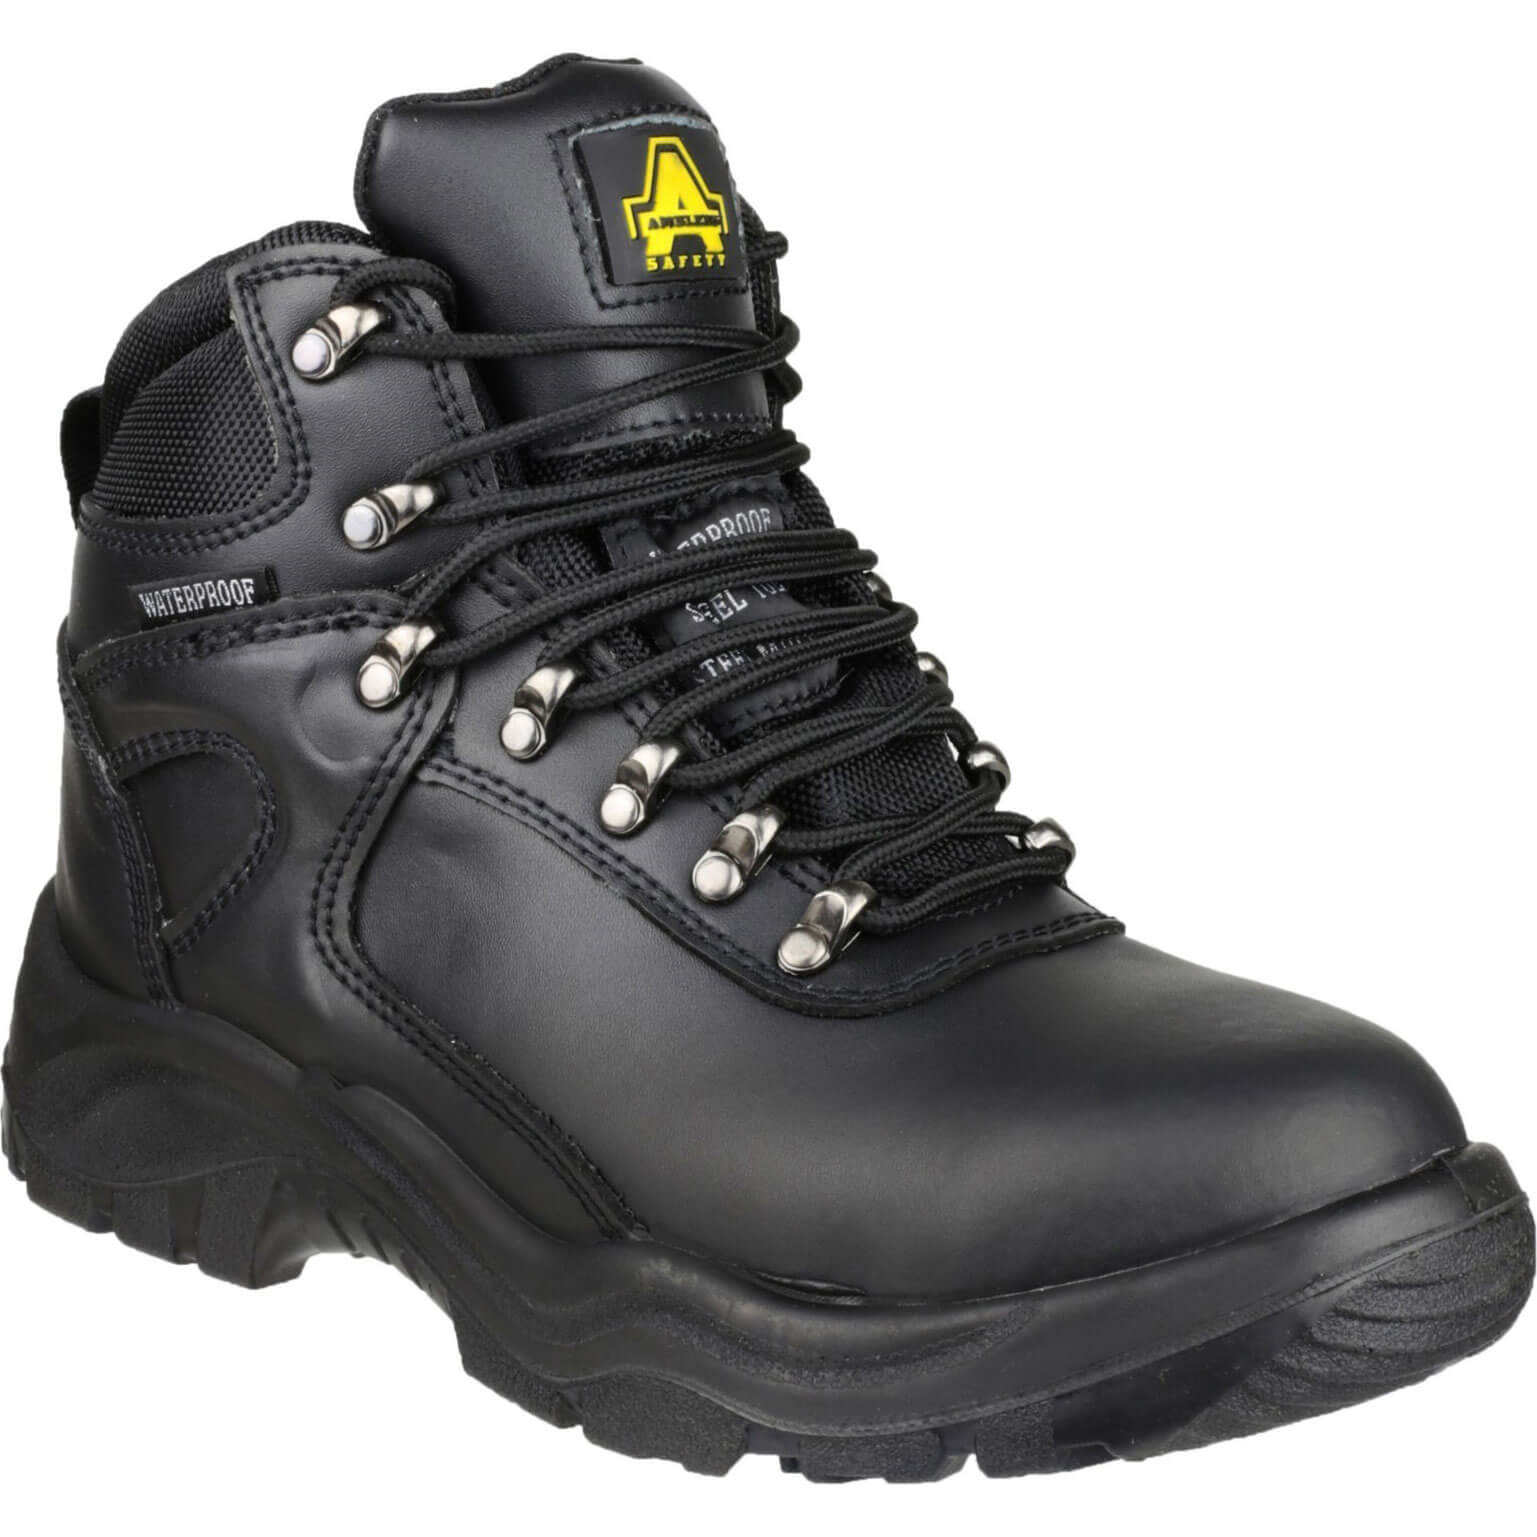 Photo of Amblers Mens Safety Fs218 Waterproof Safety Boots Black Size 11